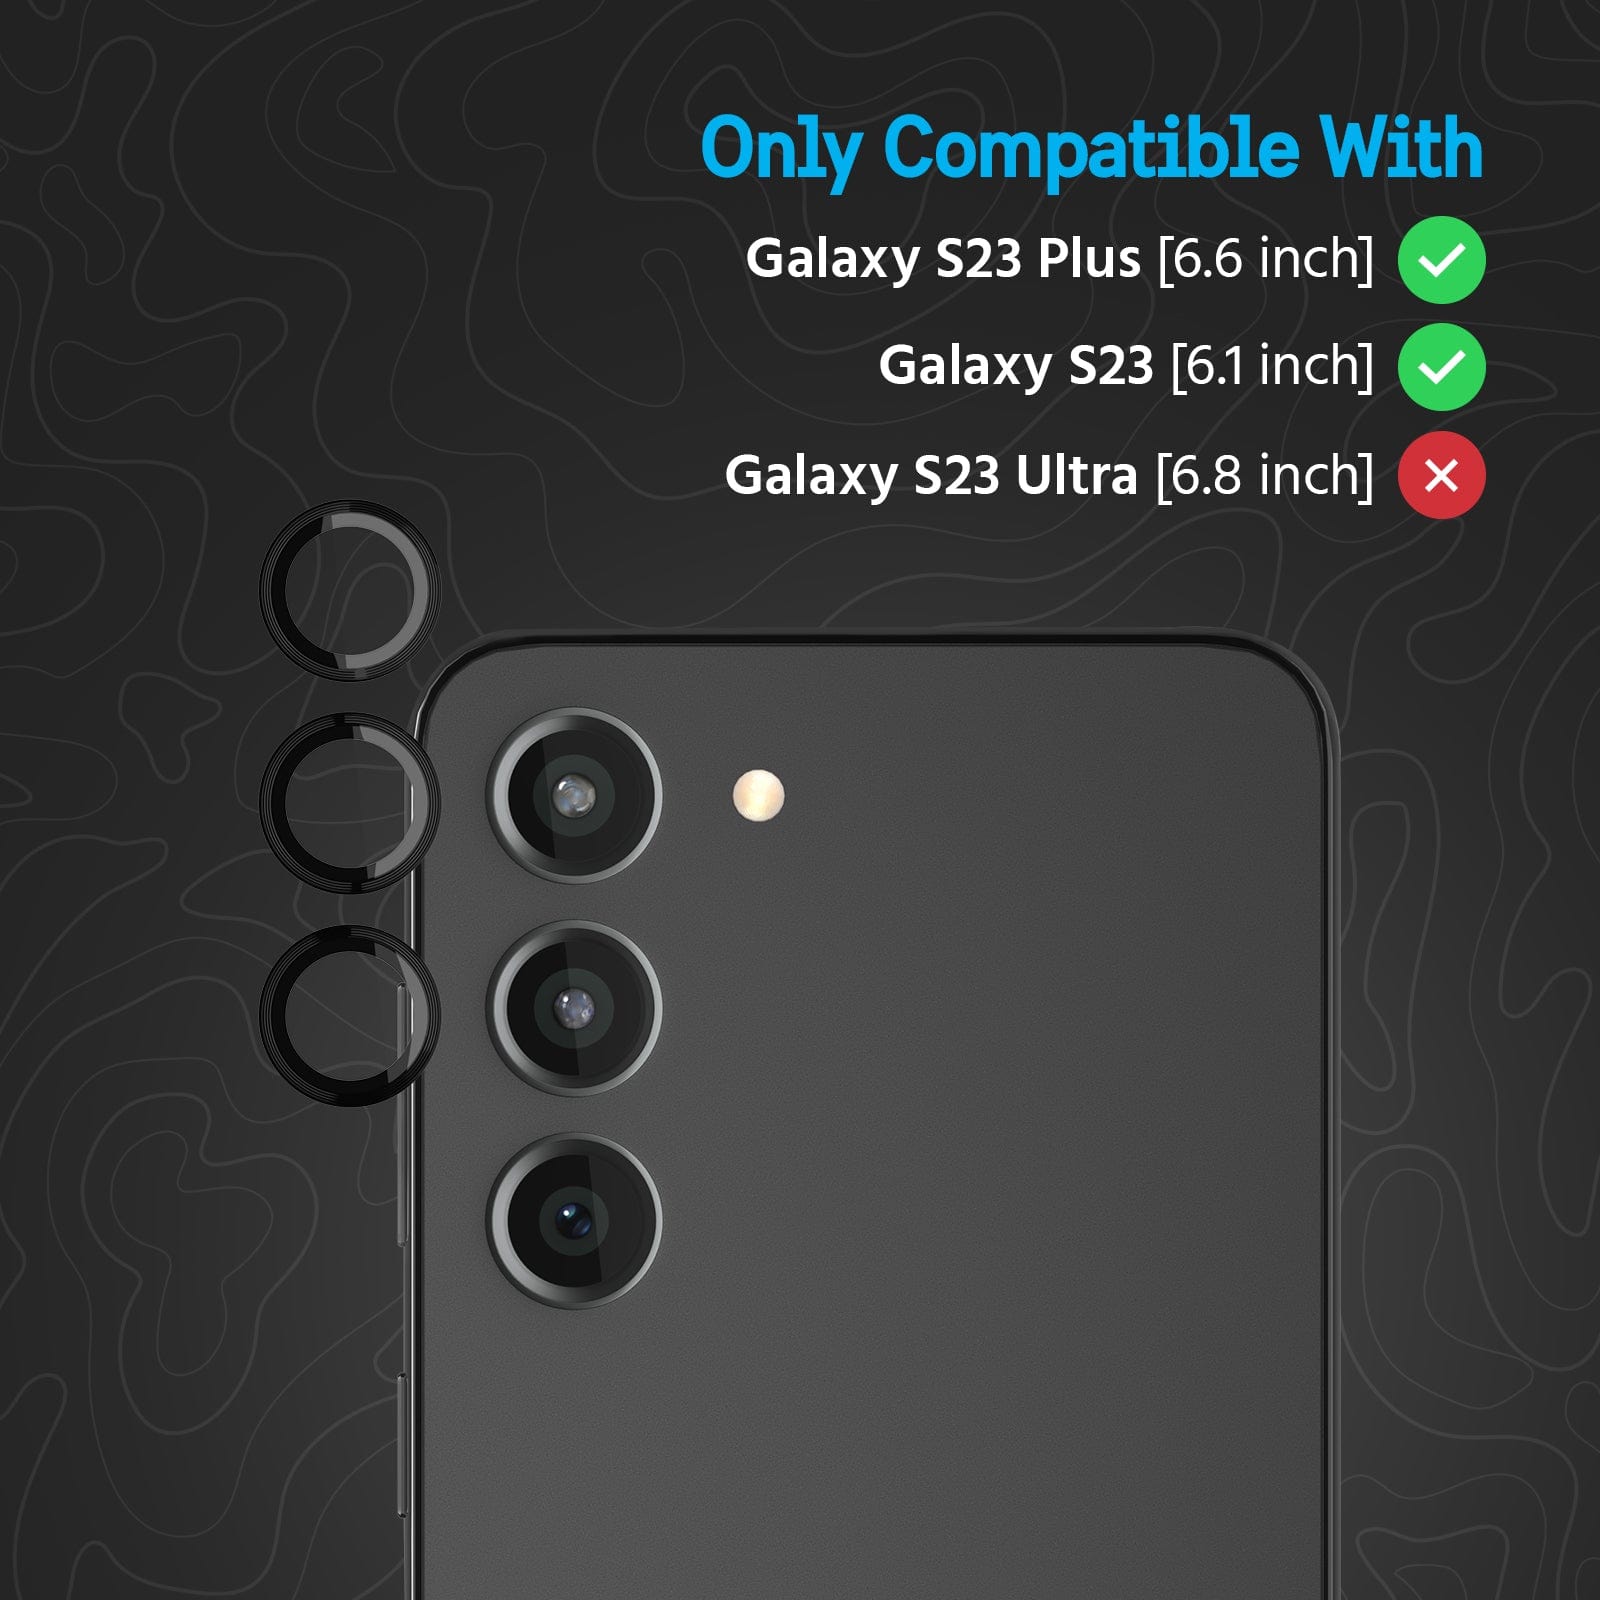 ONLY COMPATIBLE WITH GALAXY S23 PLUS, GALAXY S23